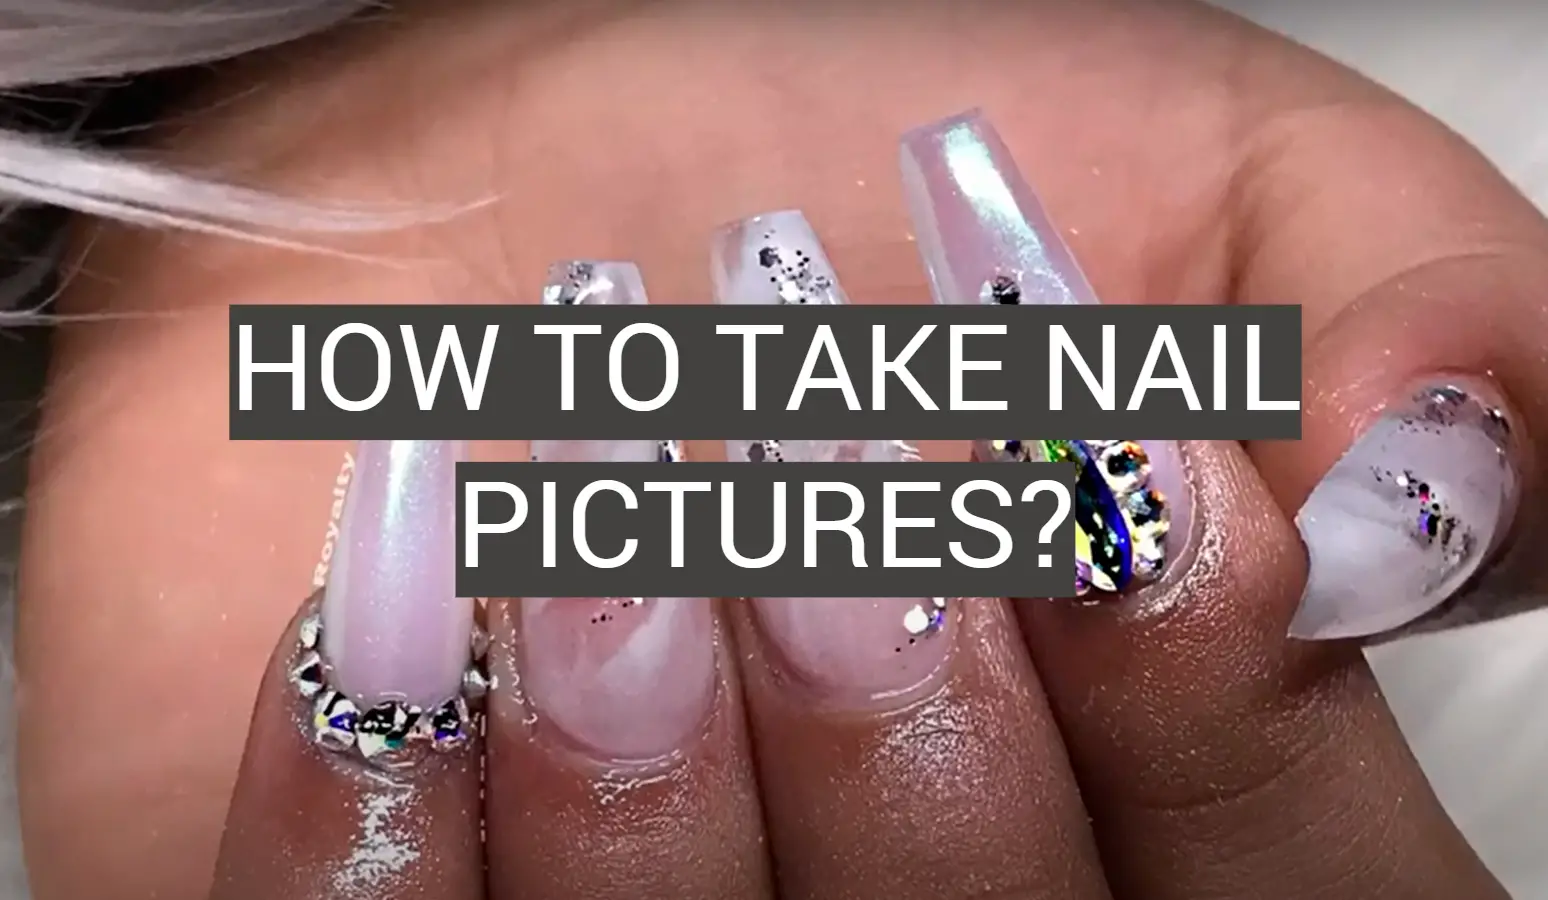 How to Take Nail Pictures? - FotoProfy